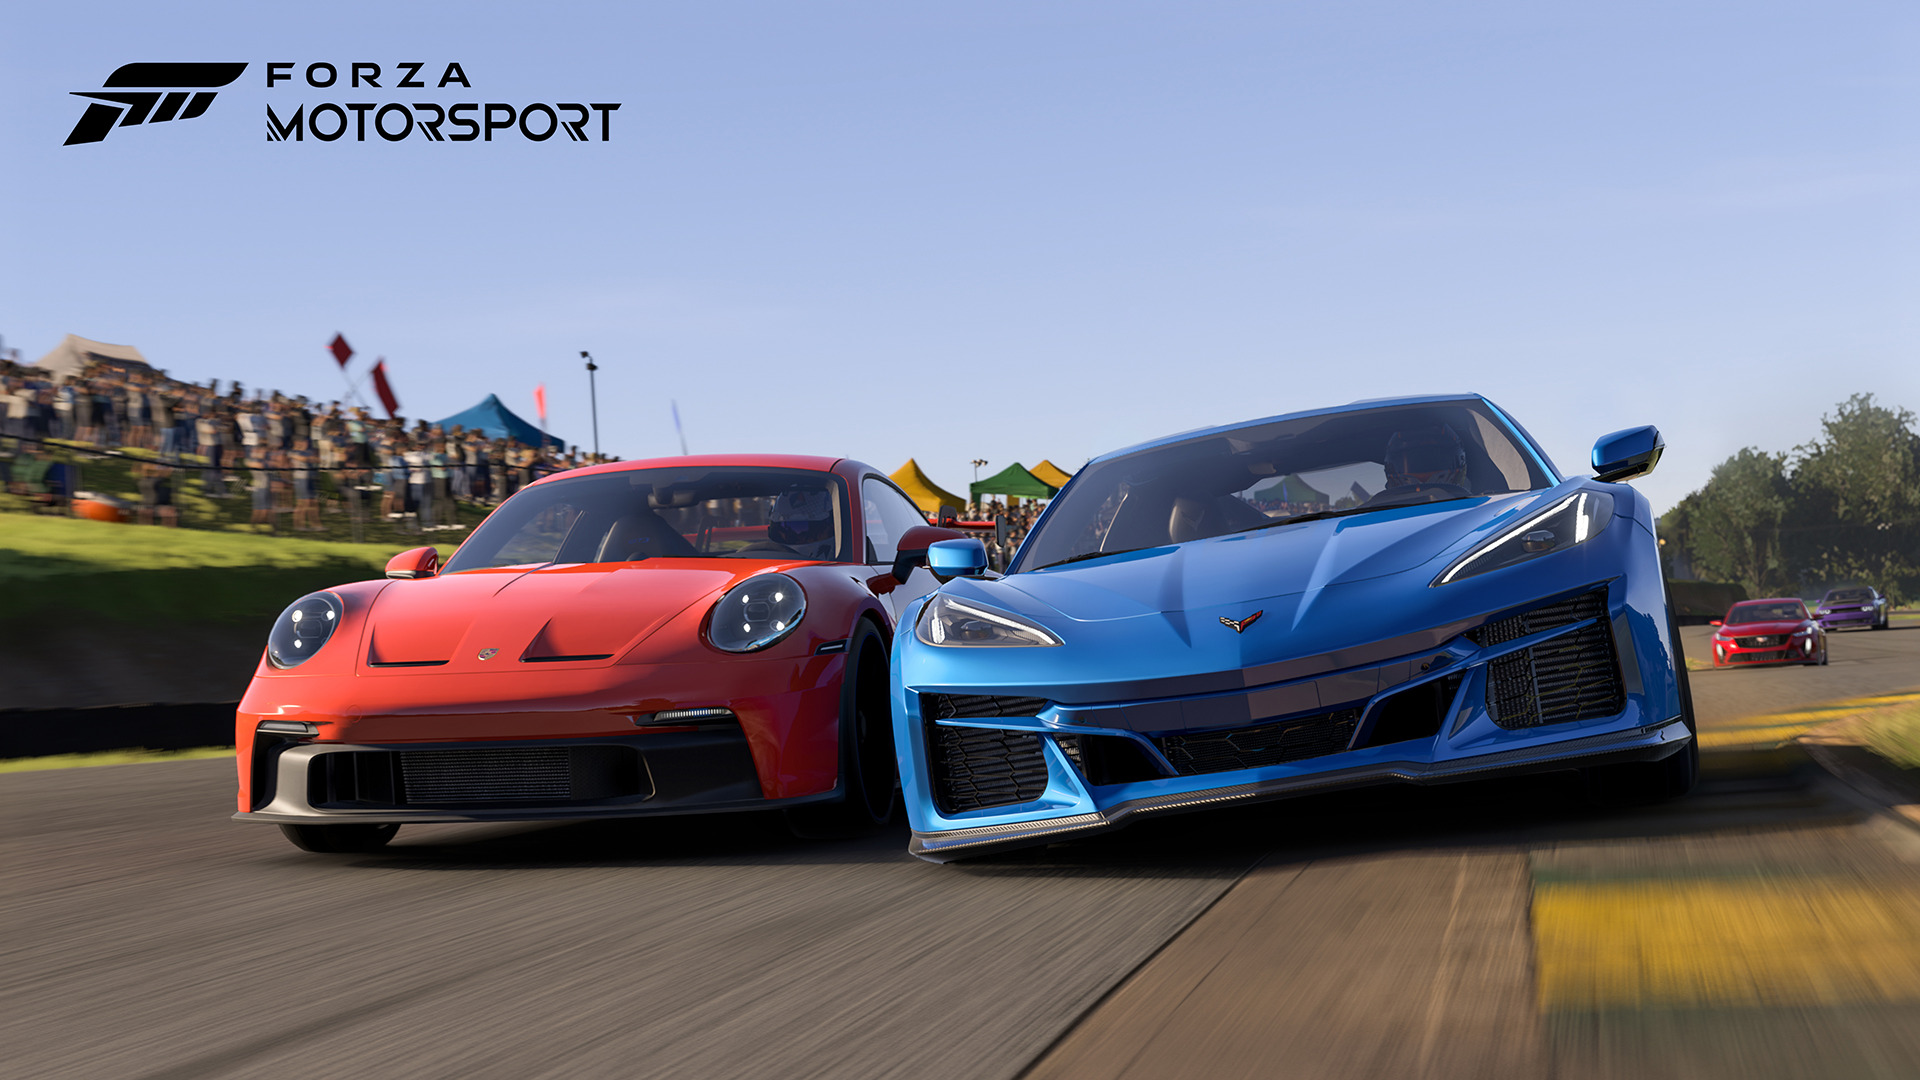 2018 Porsche 911 GT2 RS unveiled as Forza Motorsport 7 cover car - CNET